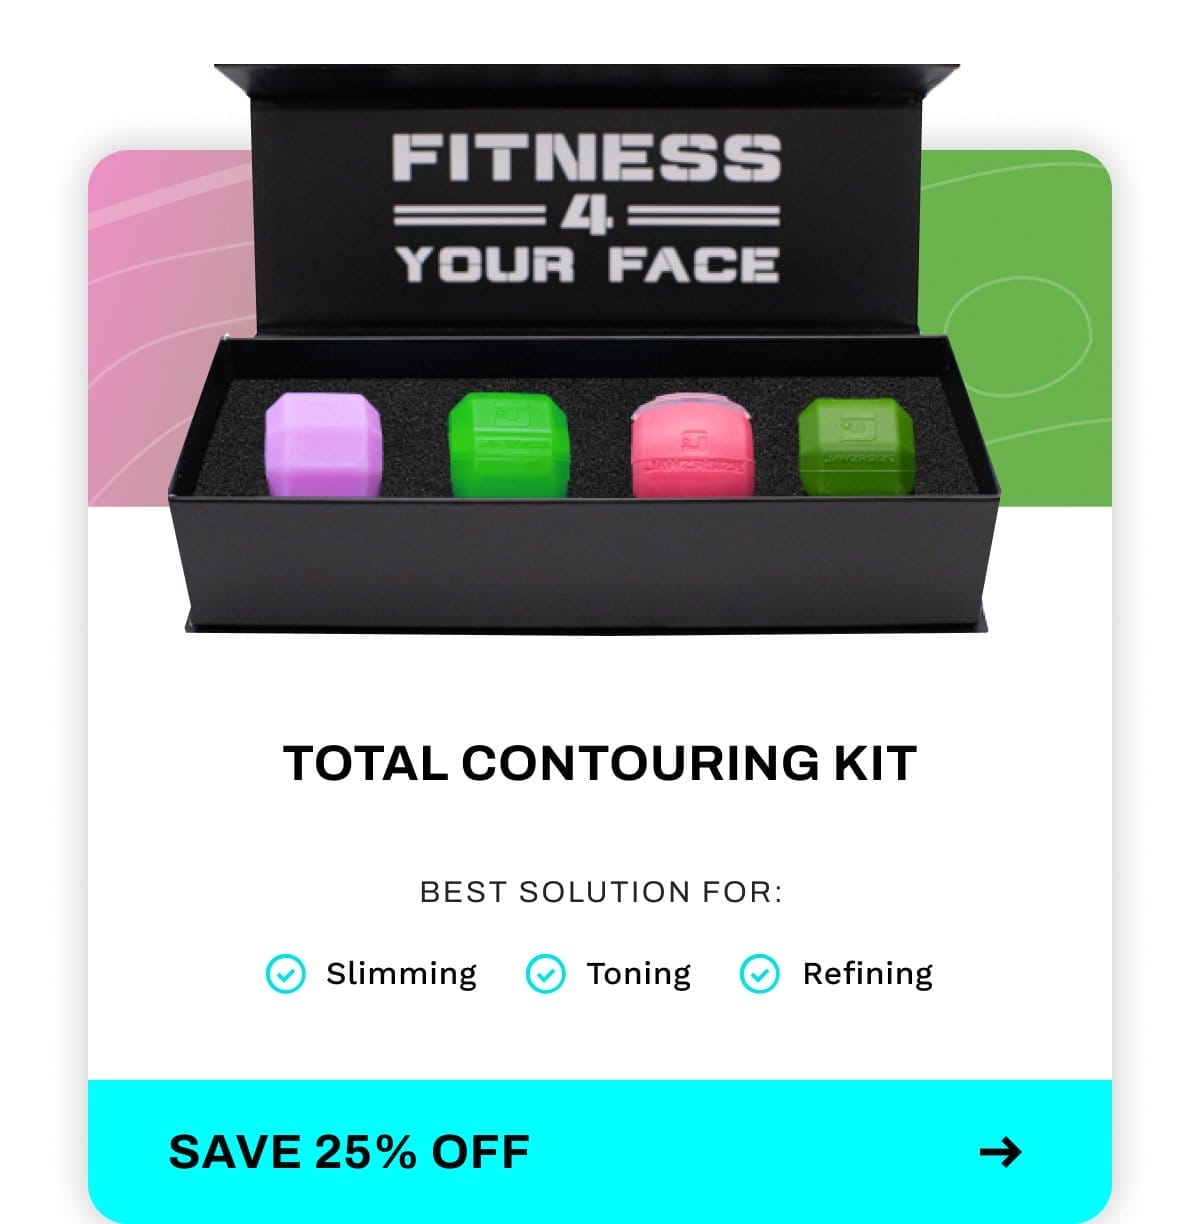 Get the Total Countouring Kit